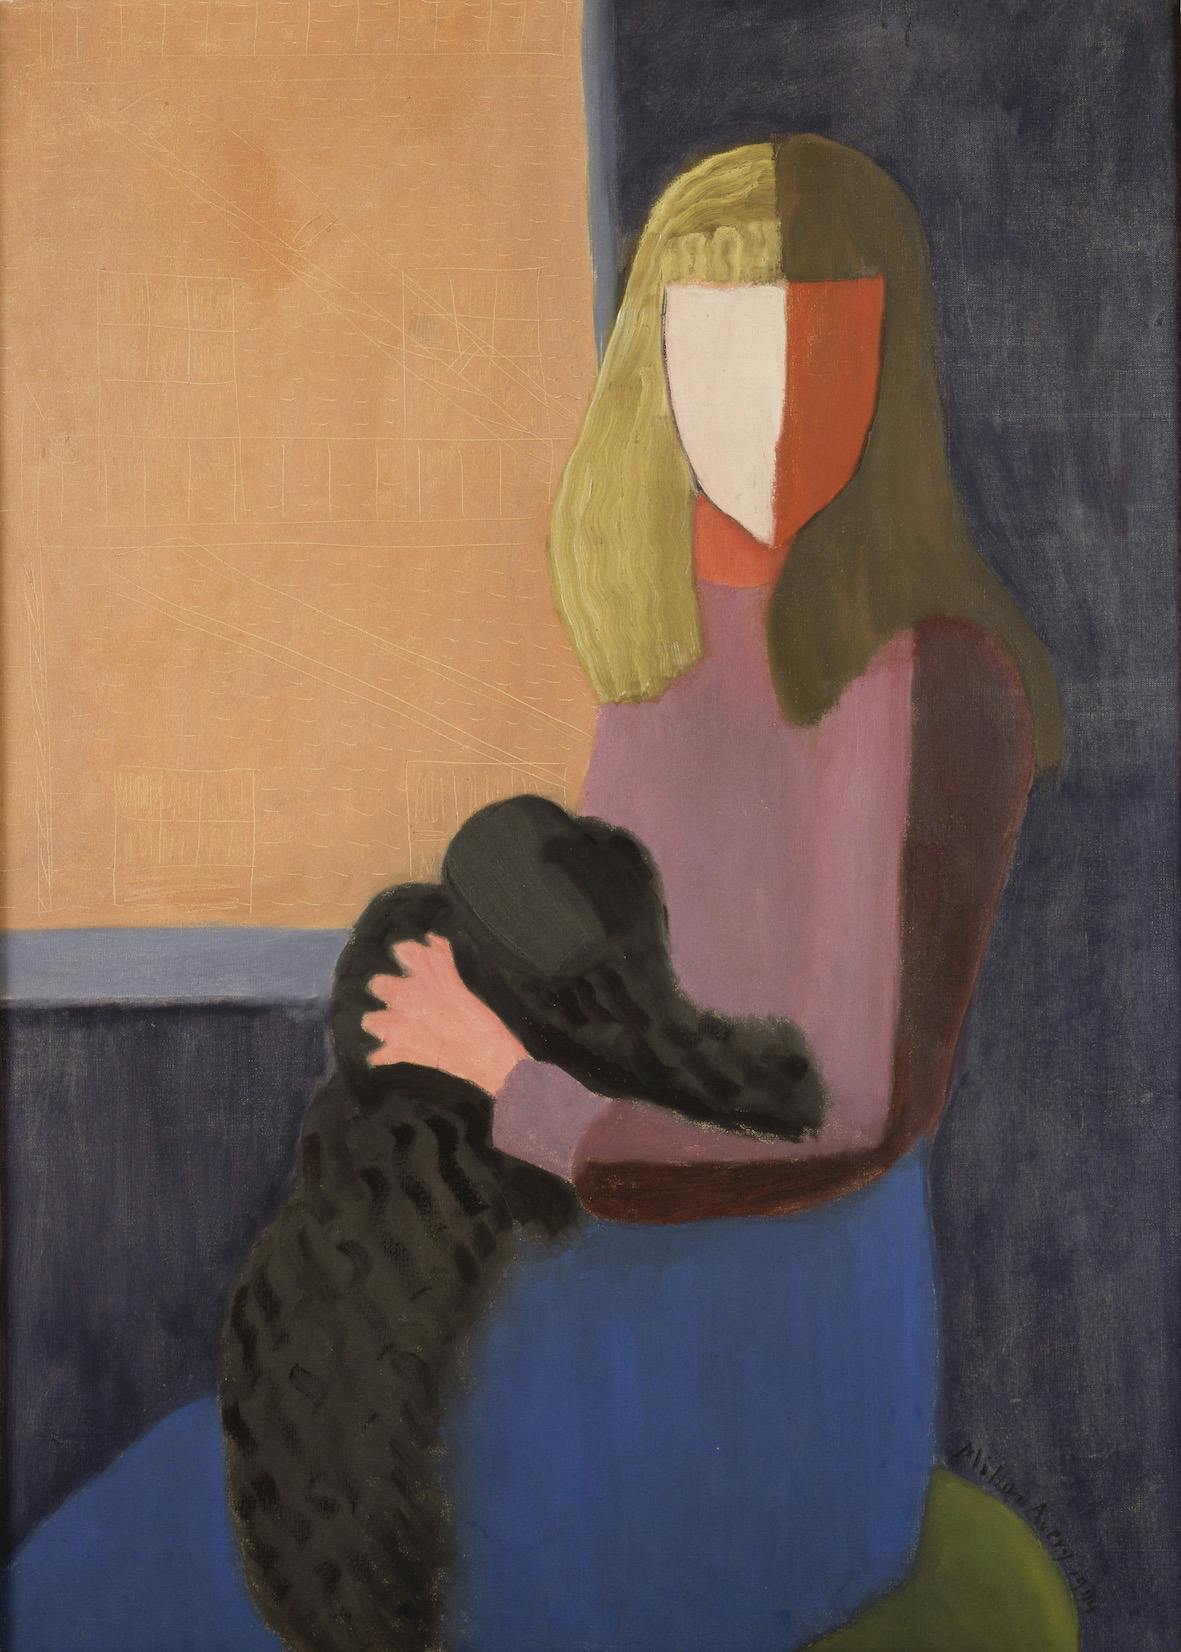 Milton Avery, Seated Girl with Dog, 1944. Oil on canvas, 111.8 x 81.3 cm. Collection Friends of Neuberger Museum of Art. (C) Milton Avery Trust / ARS, NY and DACS, London 2022